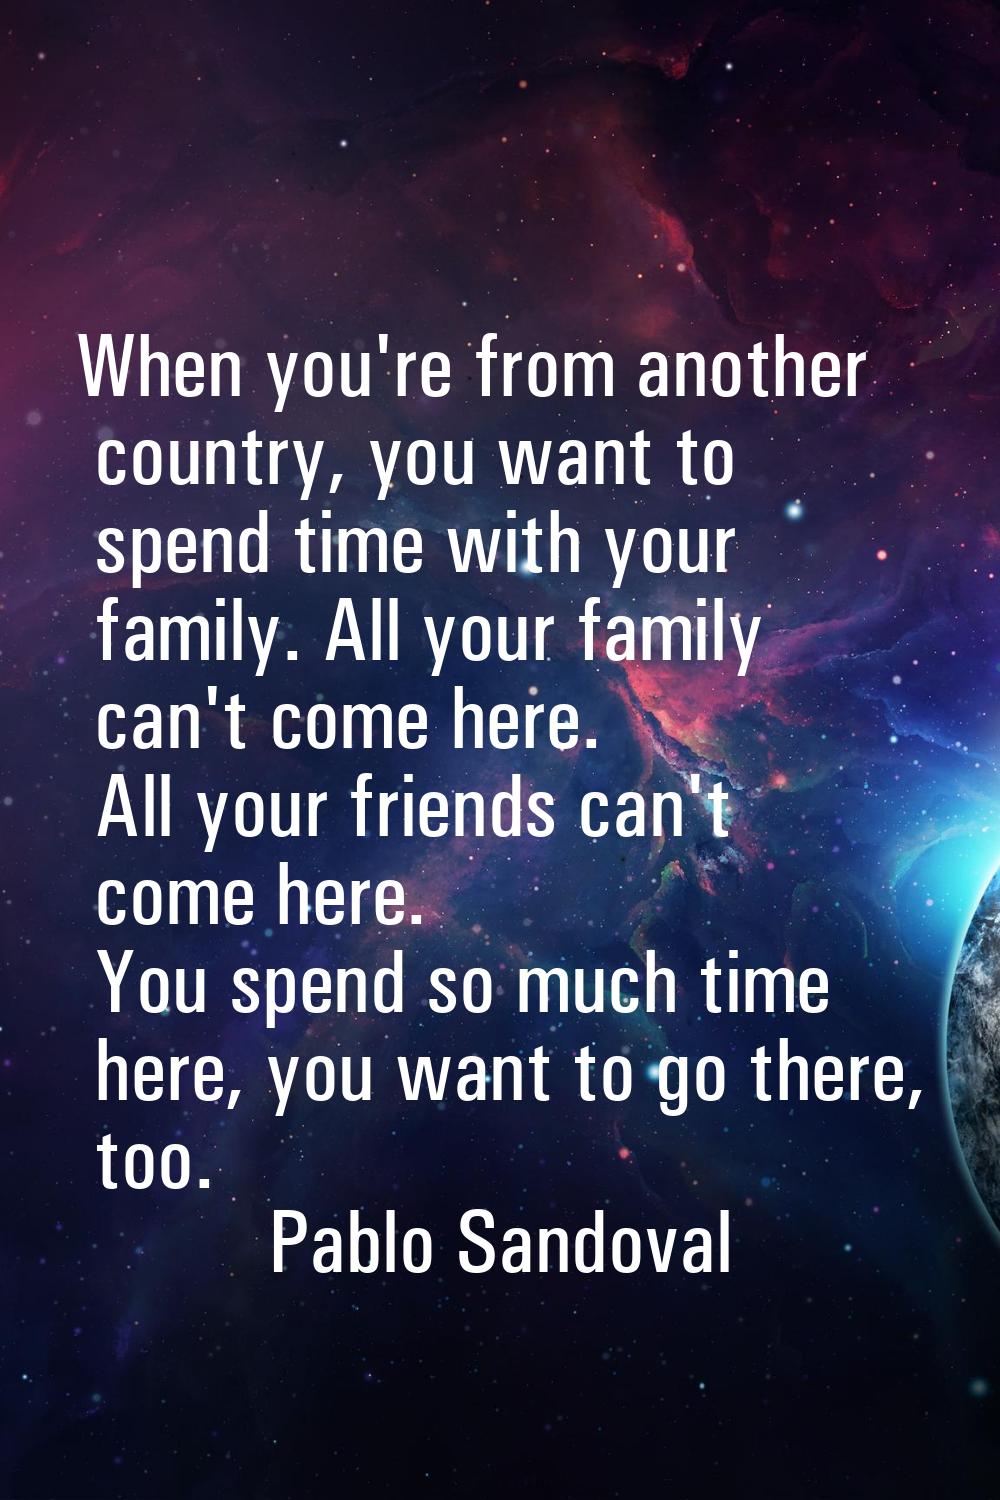 When you're from another country, you want to spend time with your family. All your family can't co